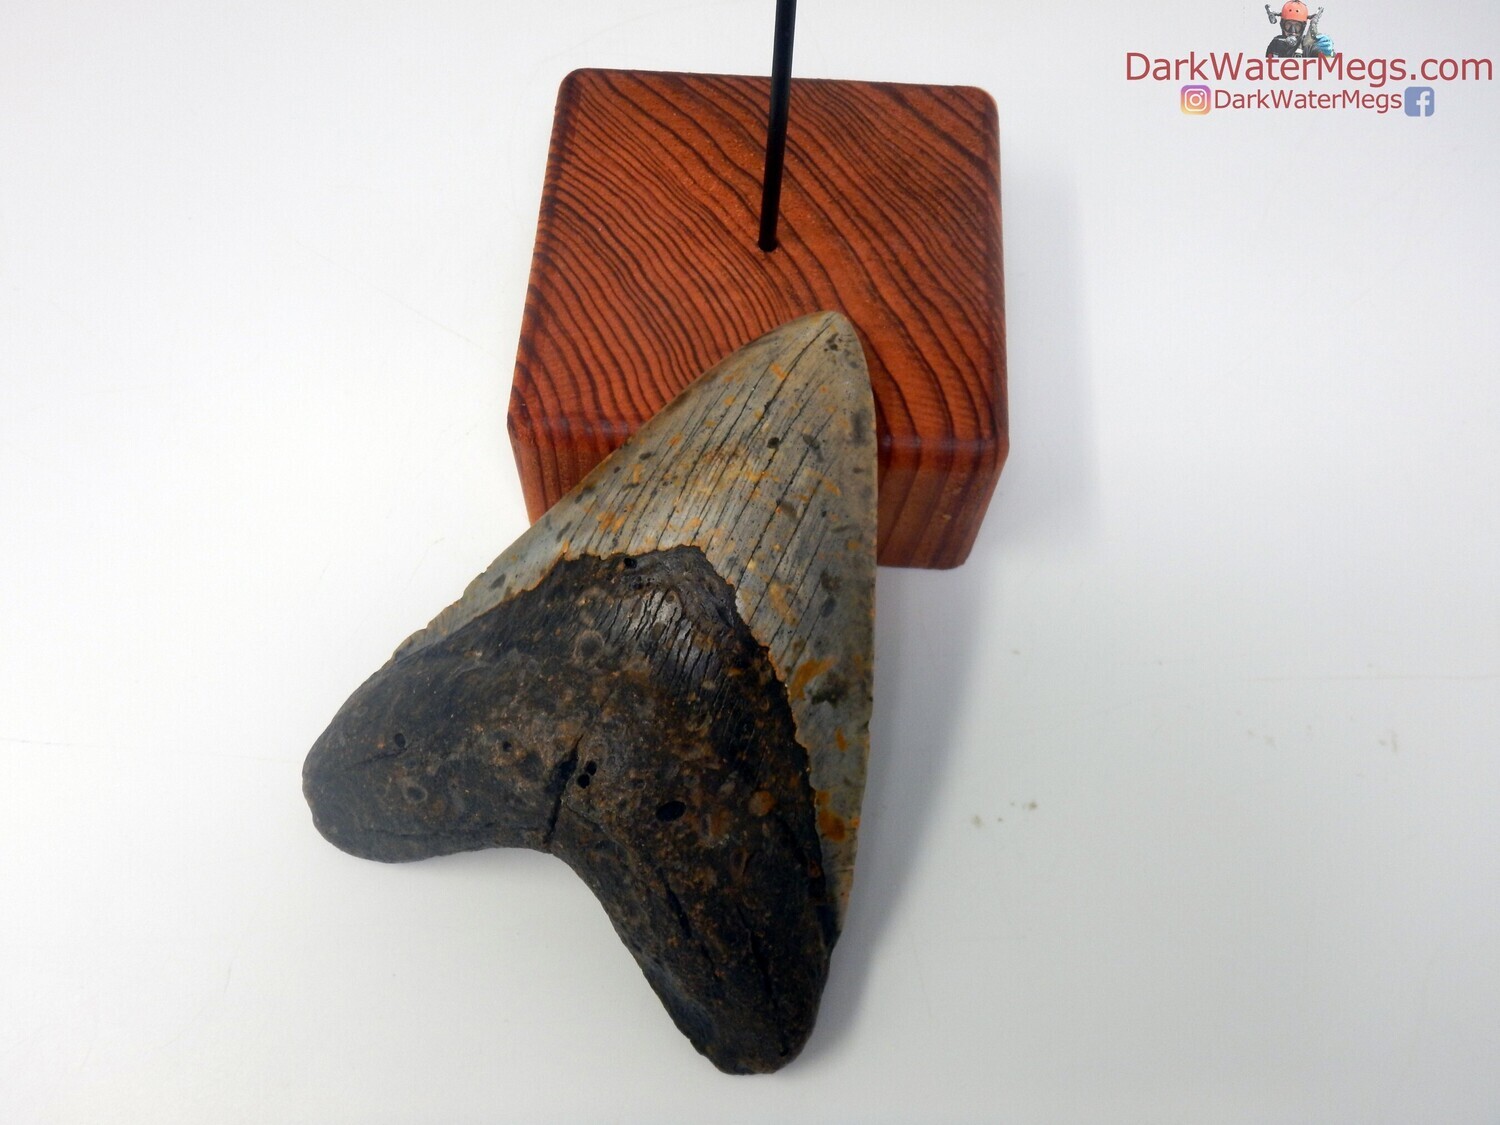 5.47 superb megalodon tooth on stand